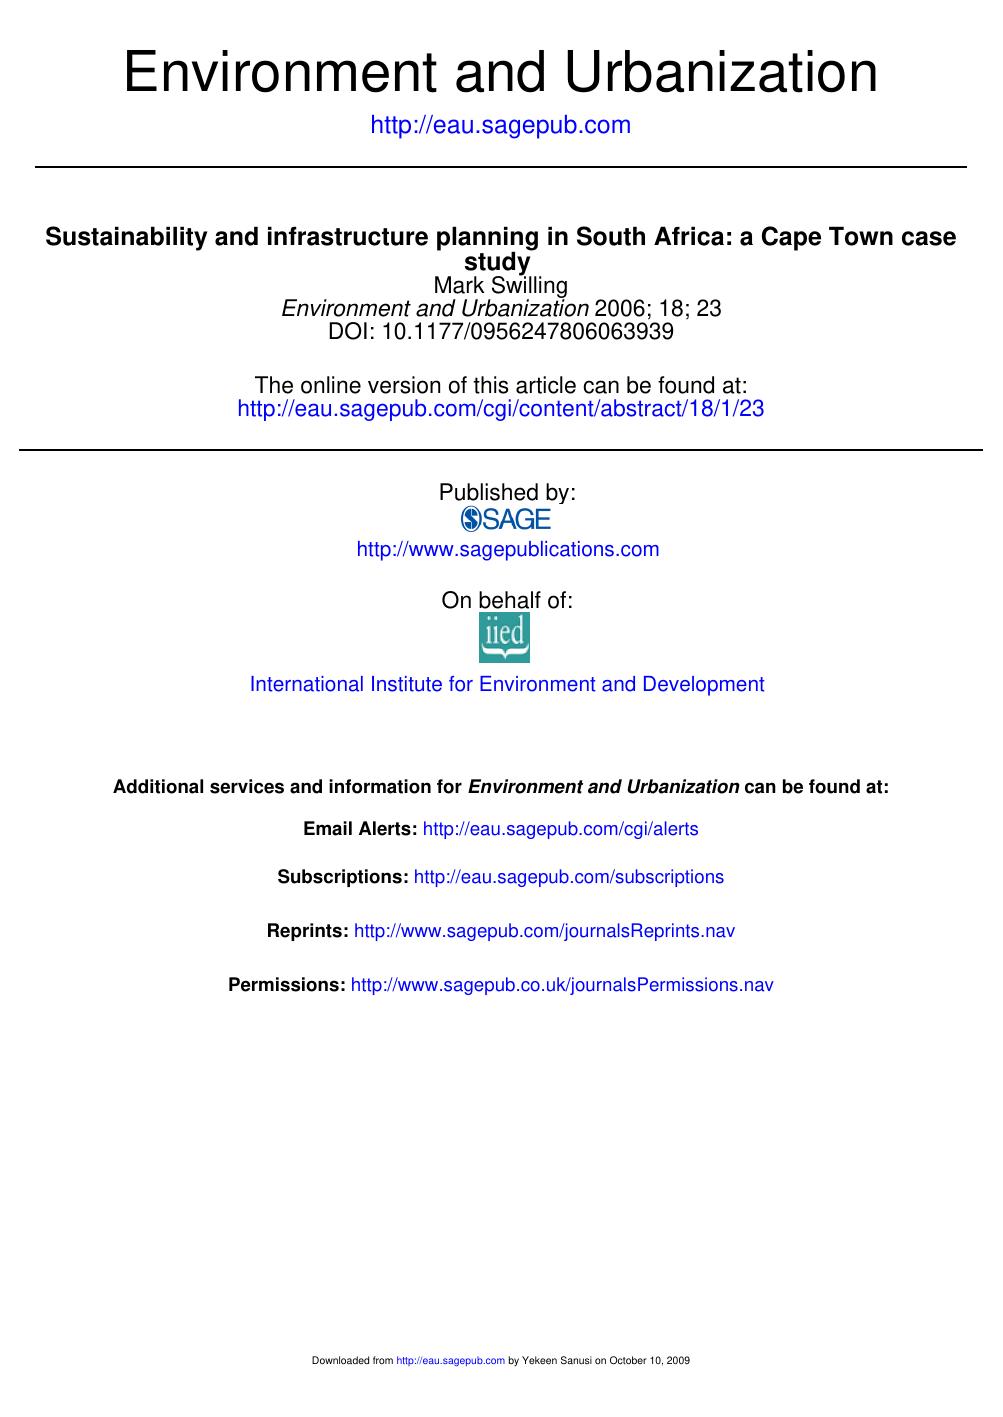 Sustainability and infrastructure planning in South Africa a Cape Town case, 2006